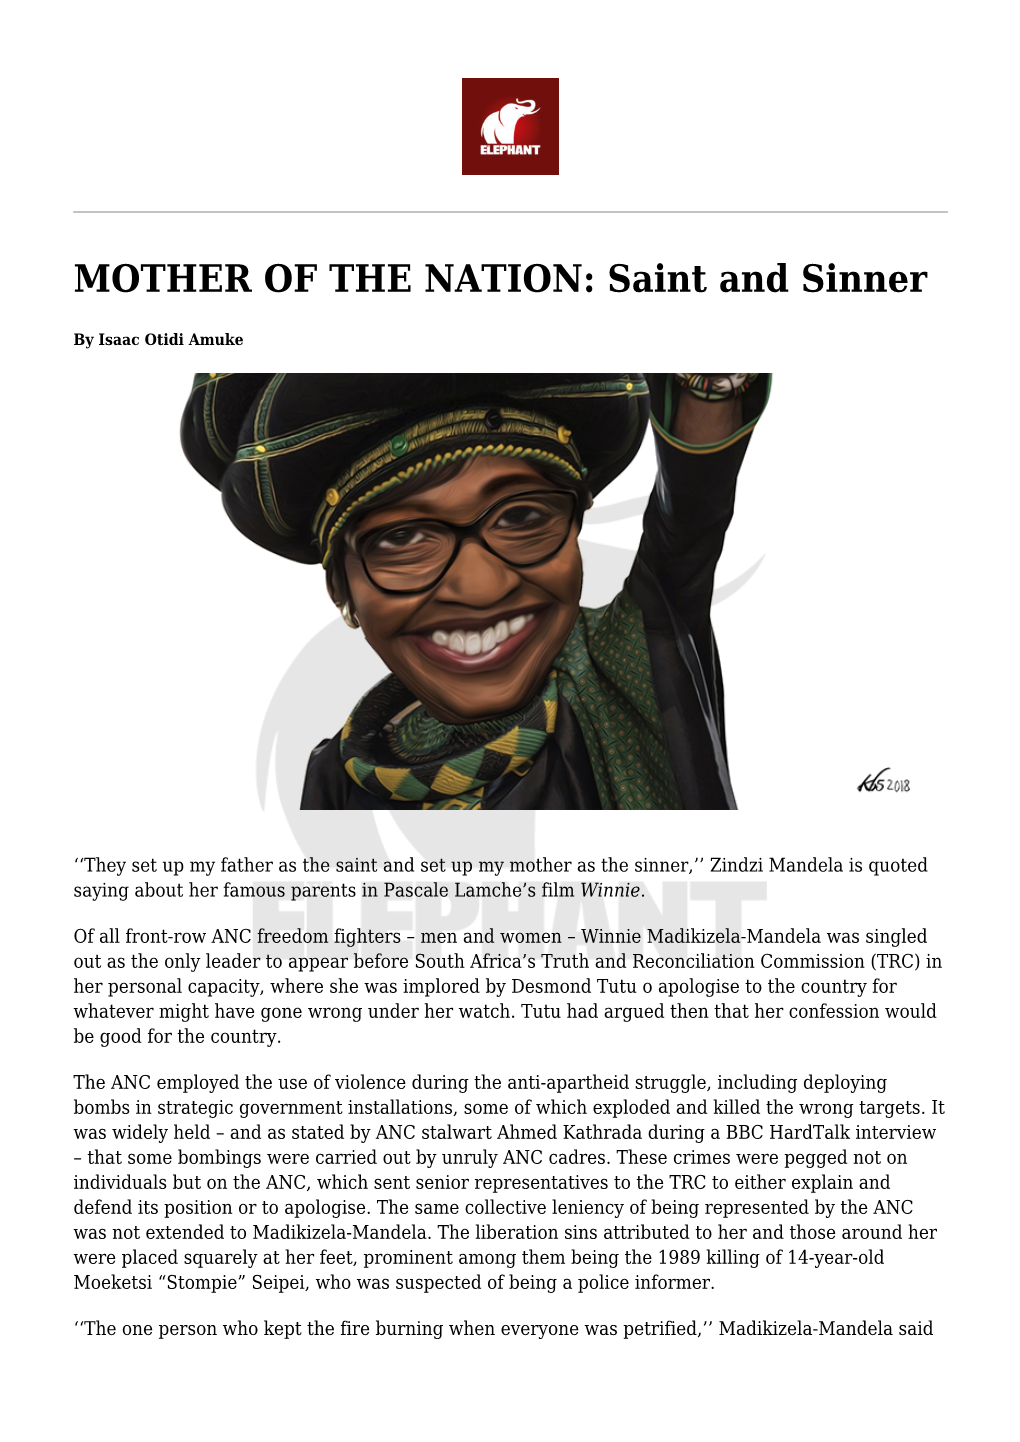 MOTHER of the NATION: Saint and Sinner